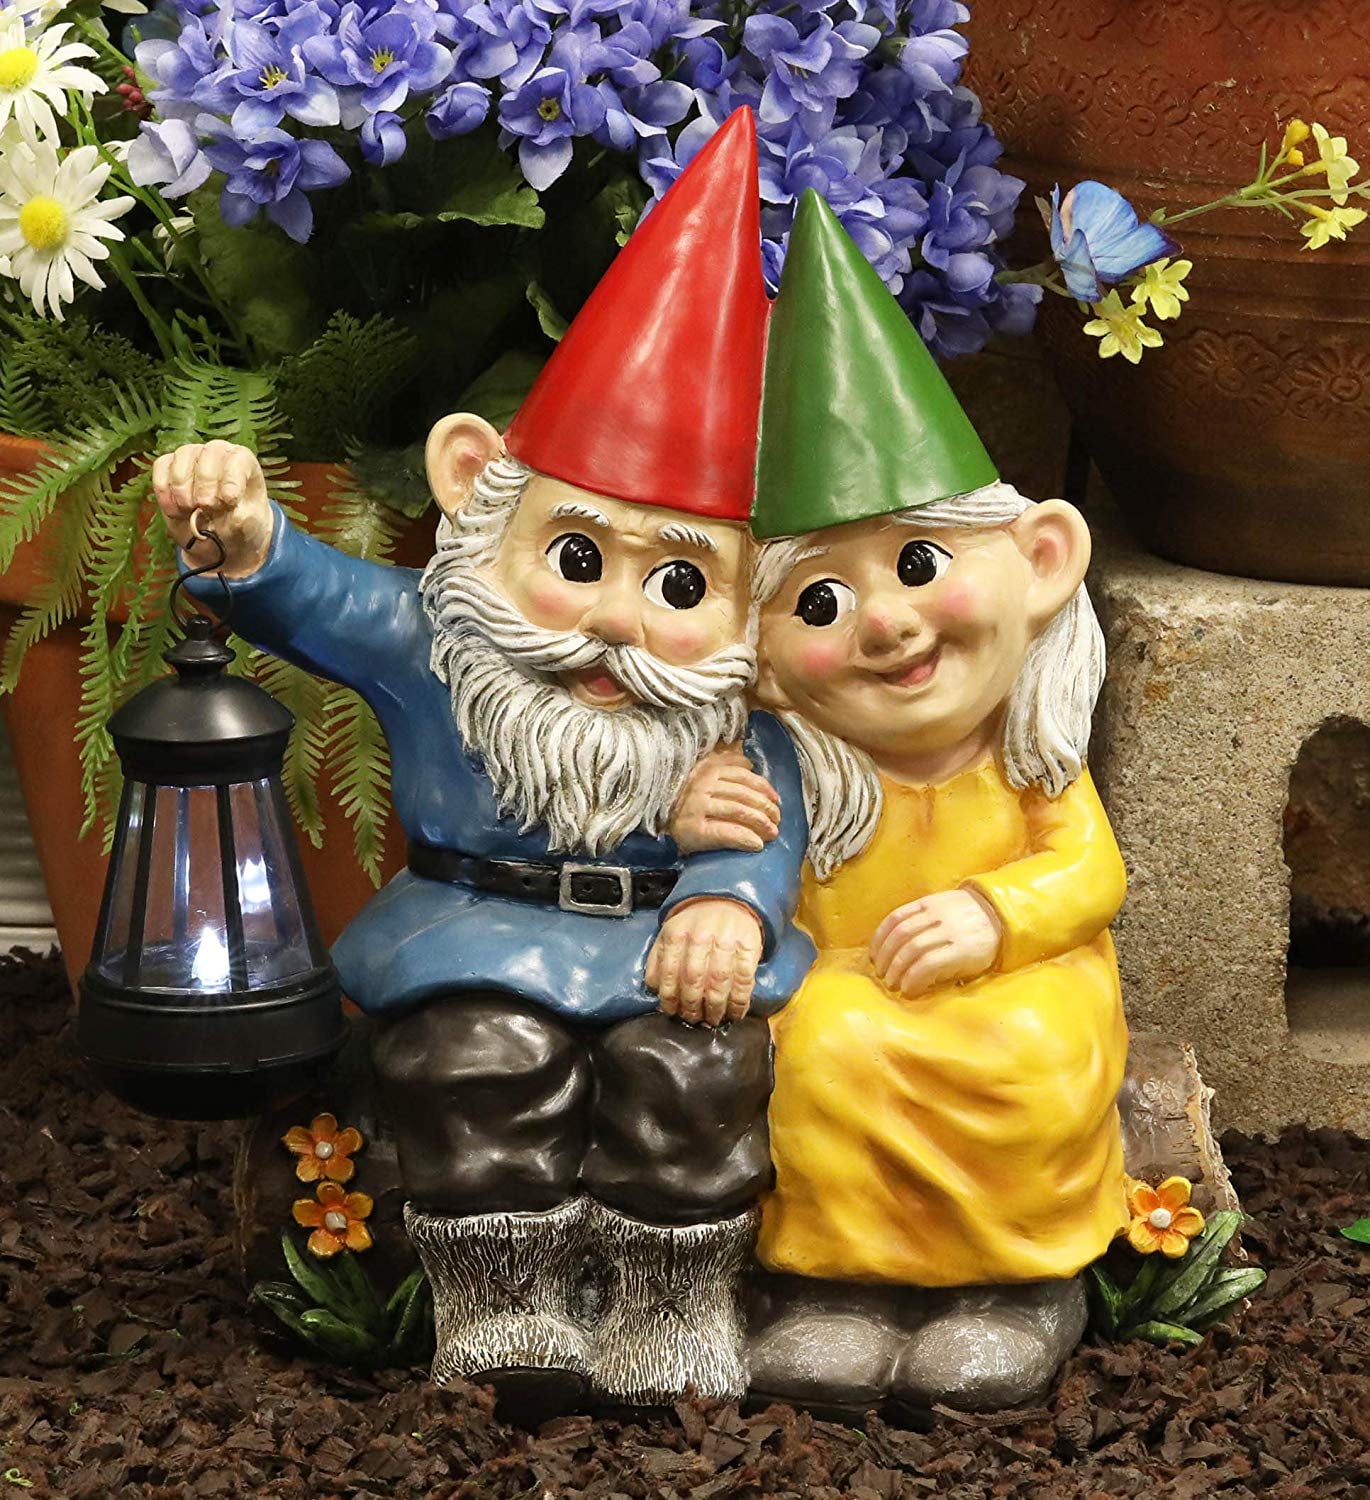 Details about   VP Home Wheelbarrow Gnome with Magic Orb Solar Powered LED Outdoor Garden Light